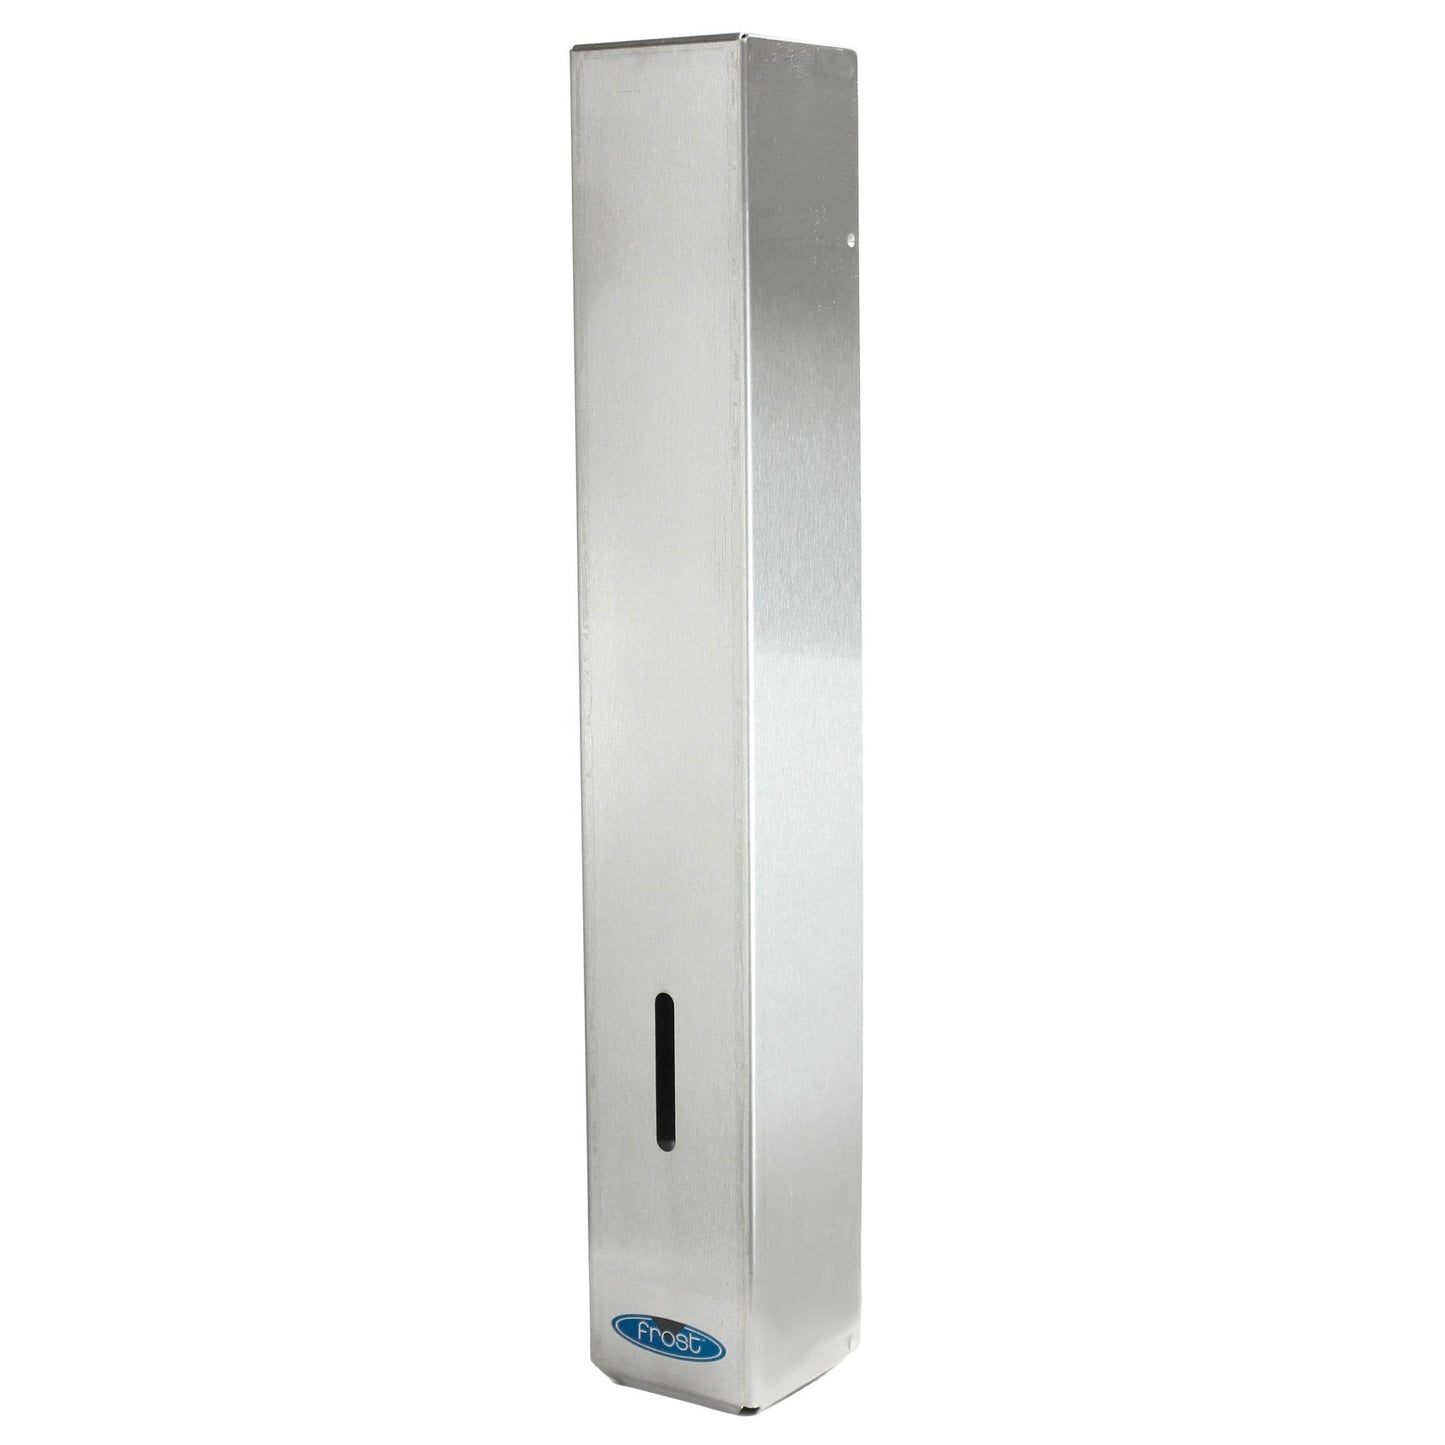 Frost 2.75 x 18.25 x 2.75 Stainless Steel Satin Paper Product Dispenser